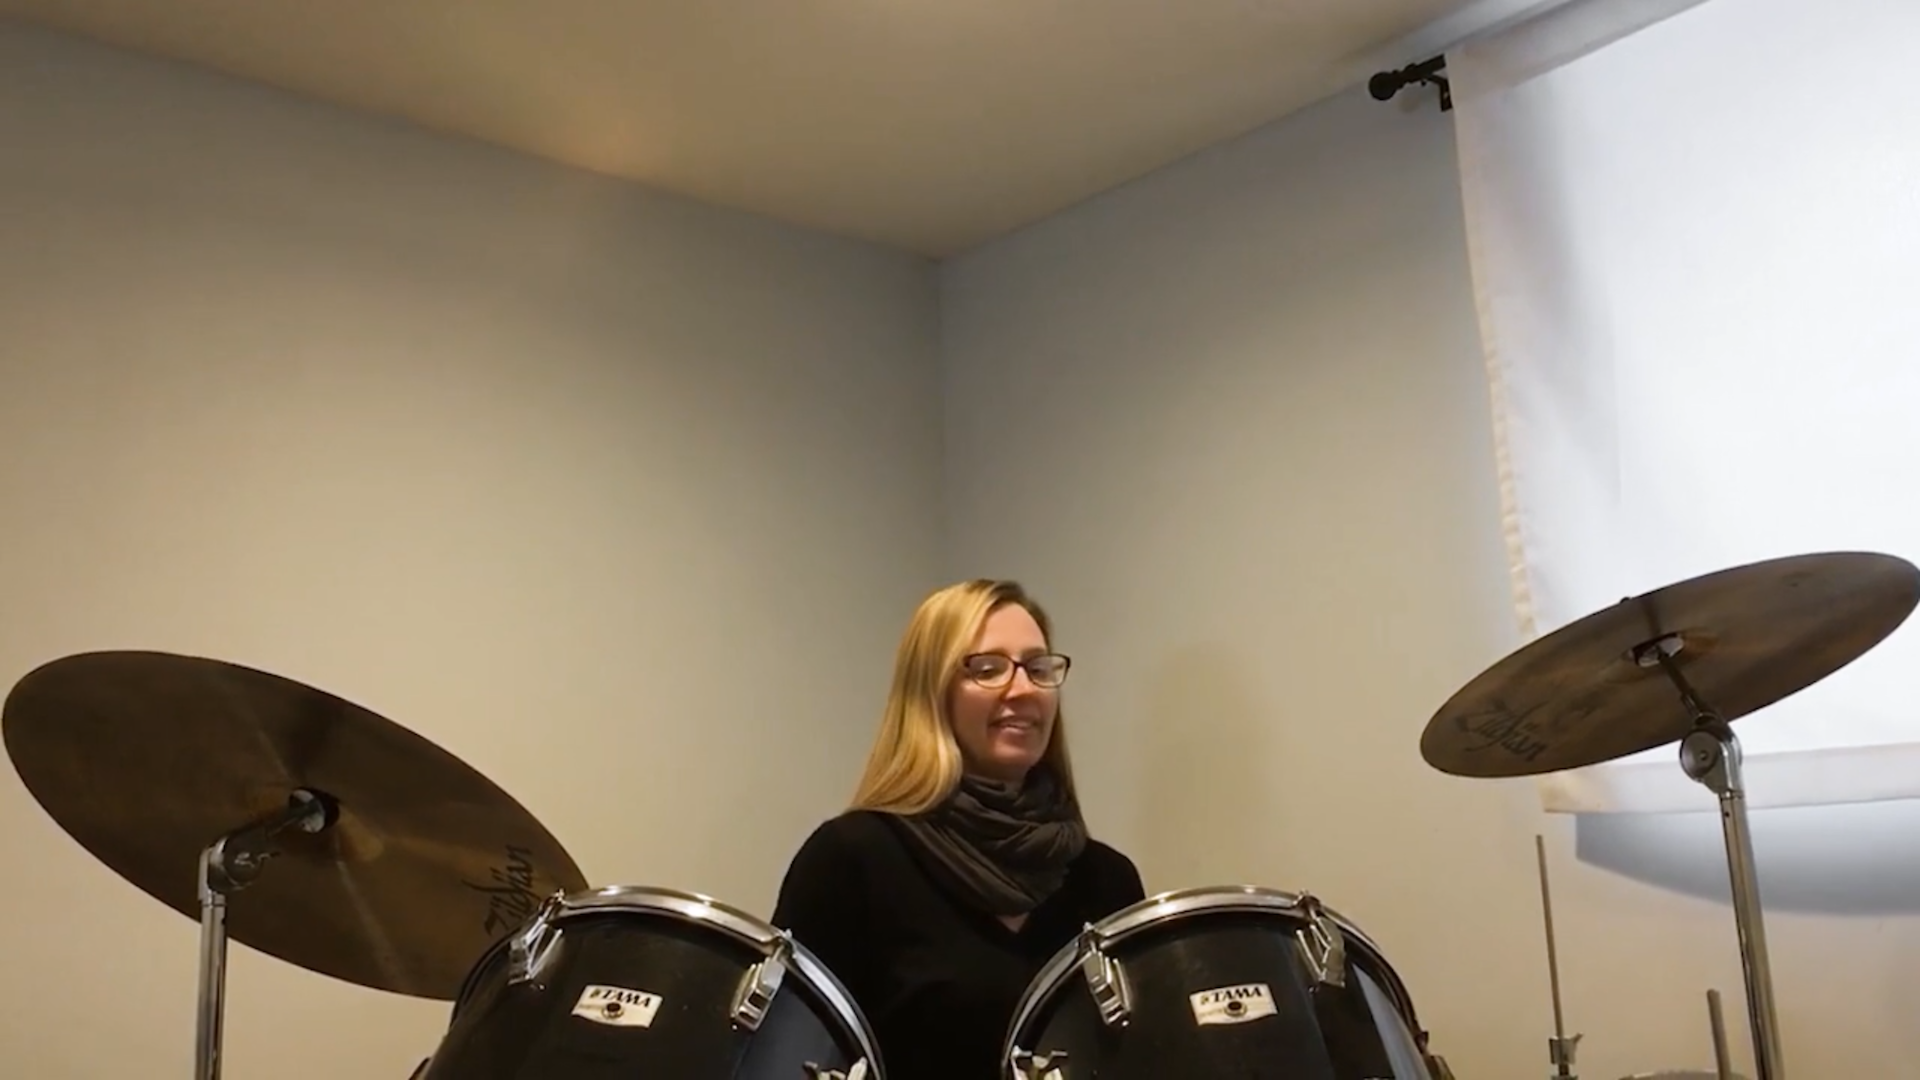 Instructor Kim Young plays the drums for her students.